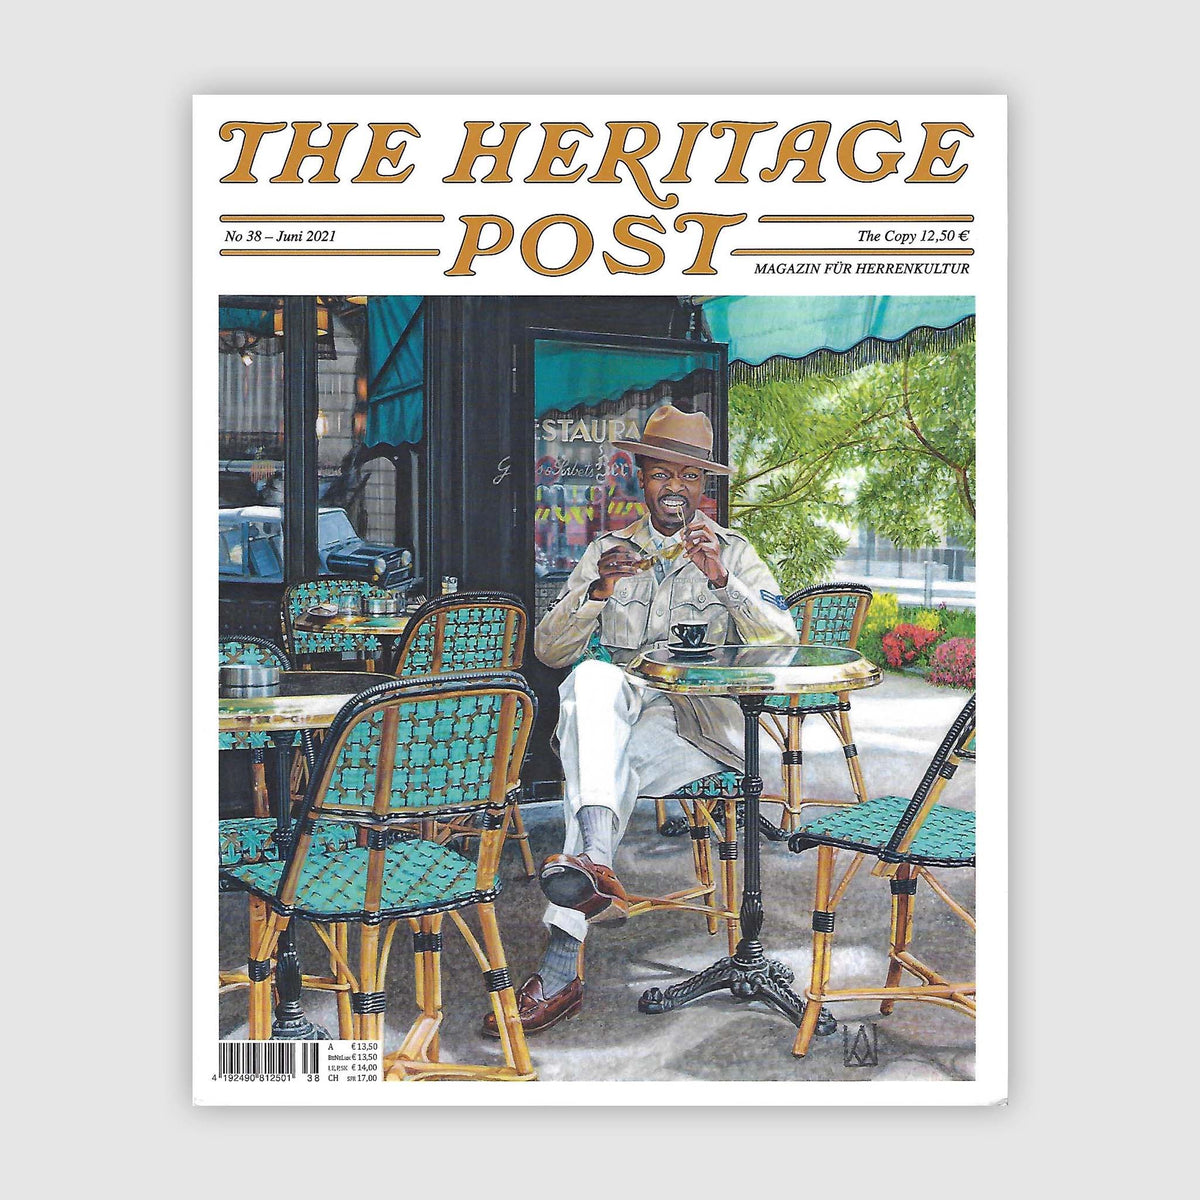 The Heritage Post No. 38